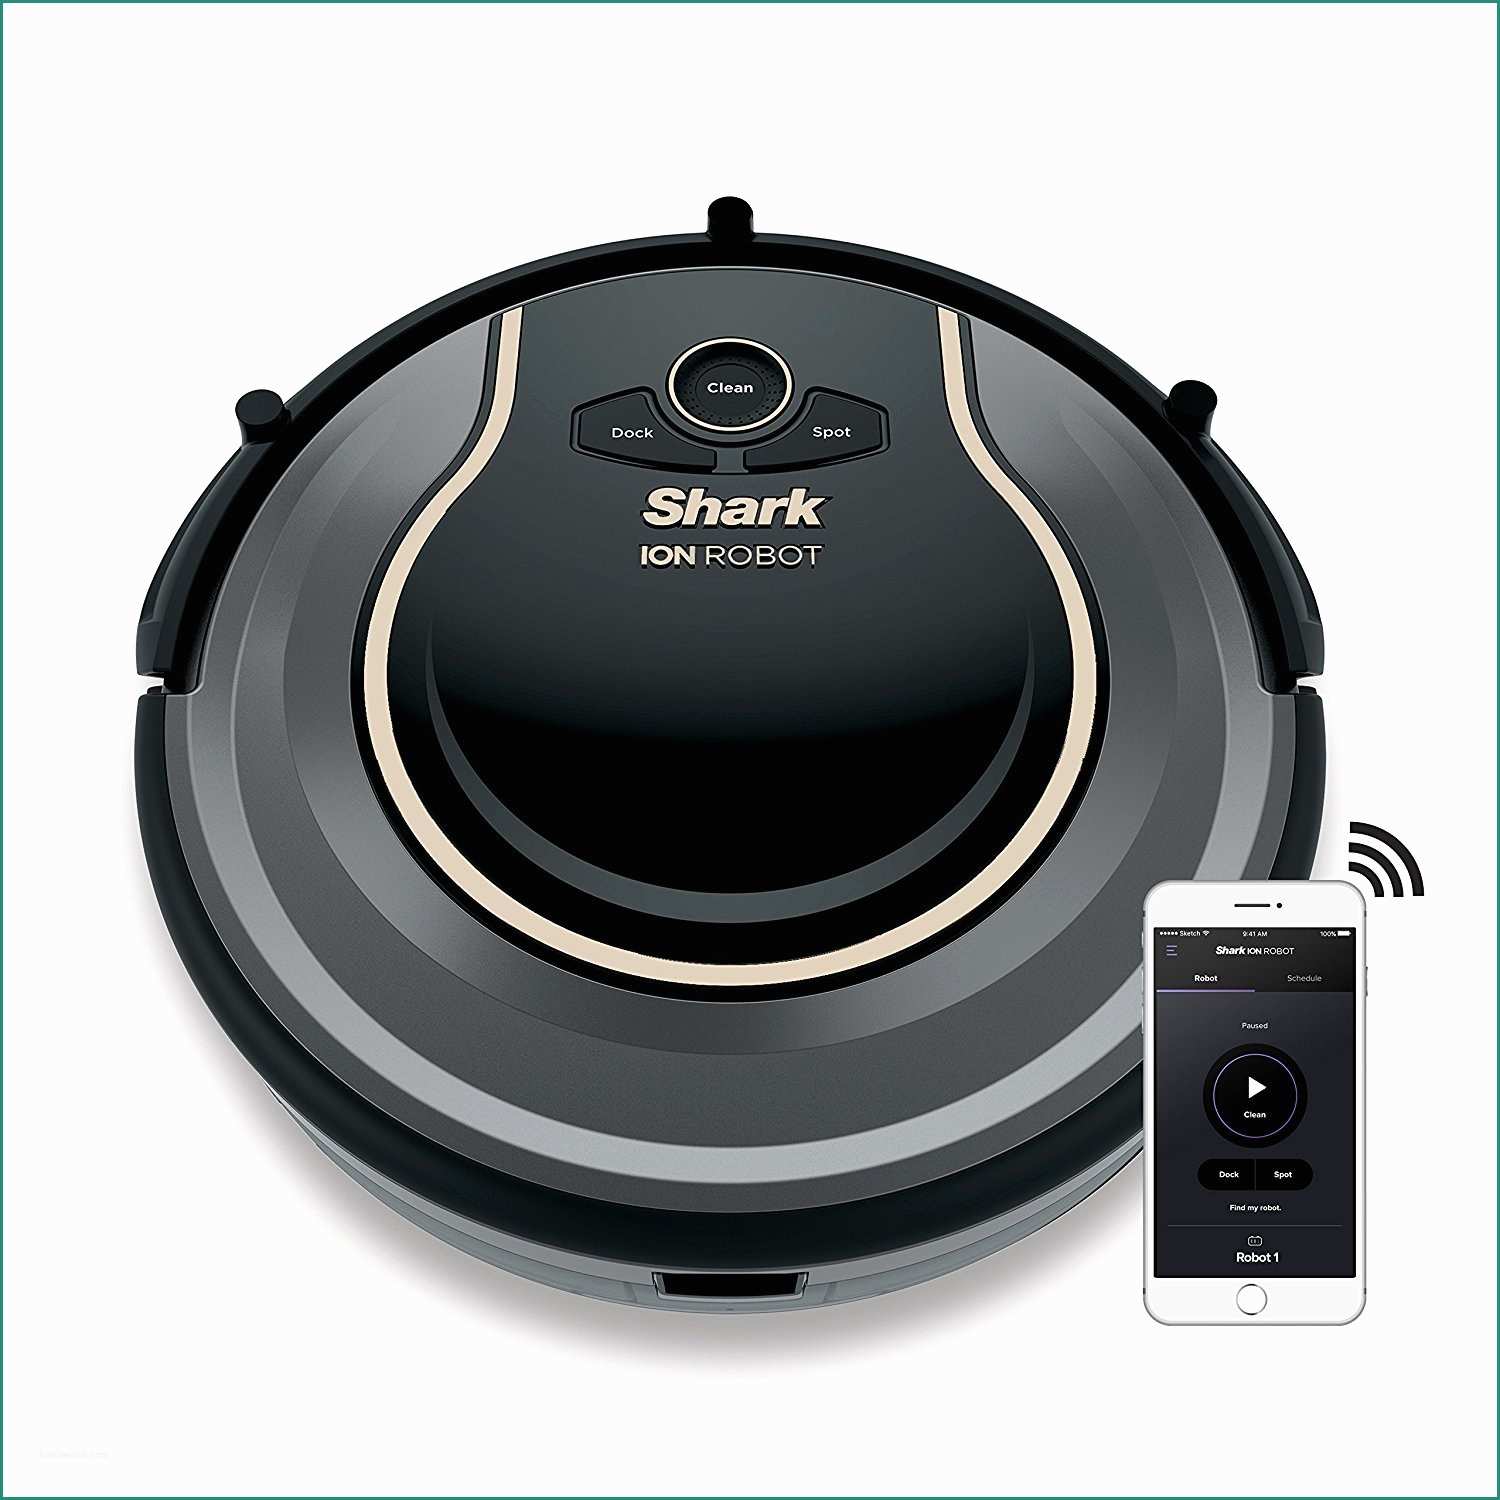 Roomba Recensioni E 7 Best Robot Vacuums In 2018 with High Quality Cleaning